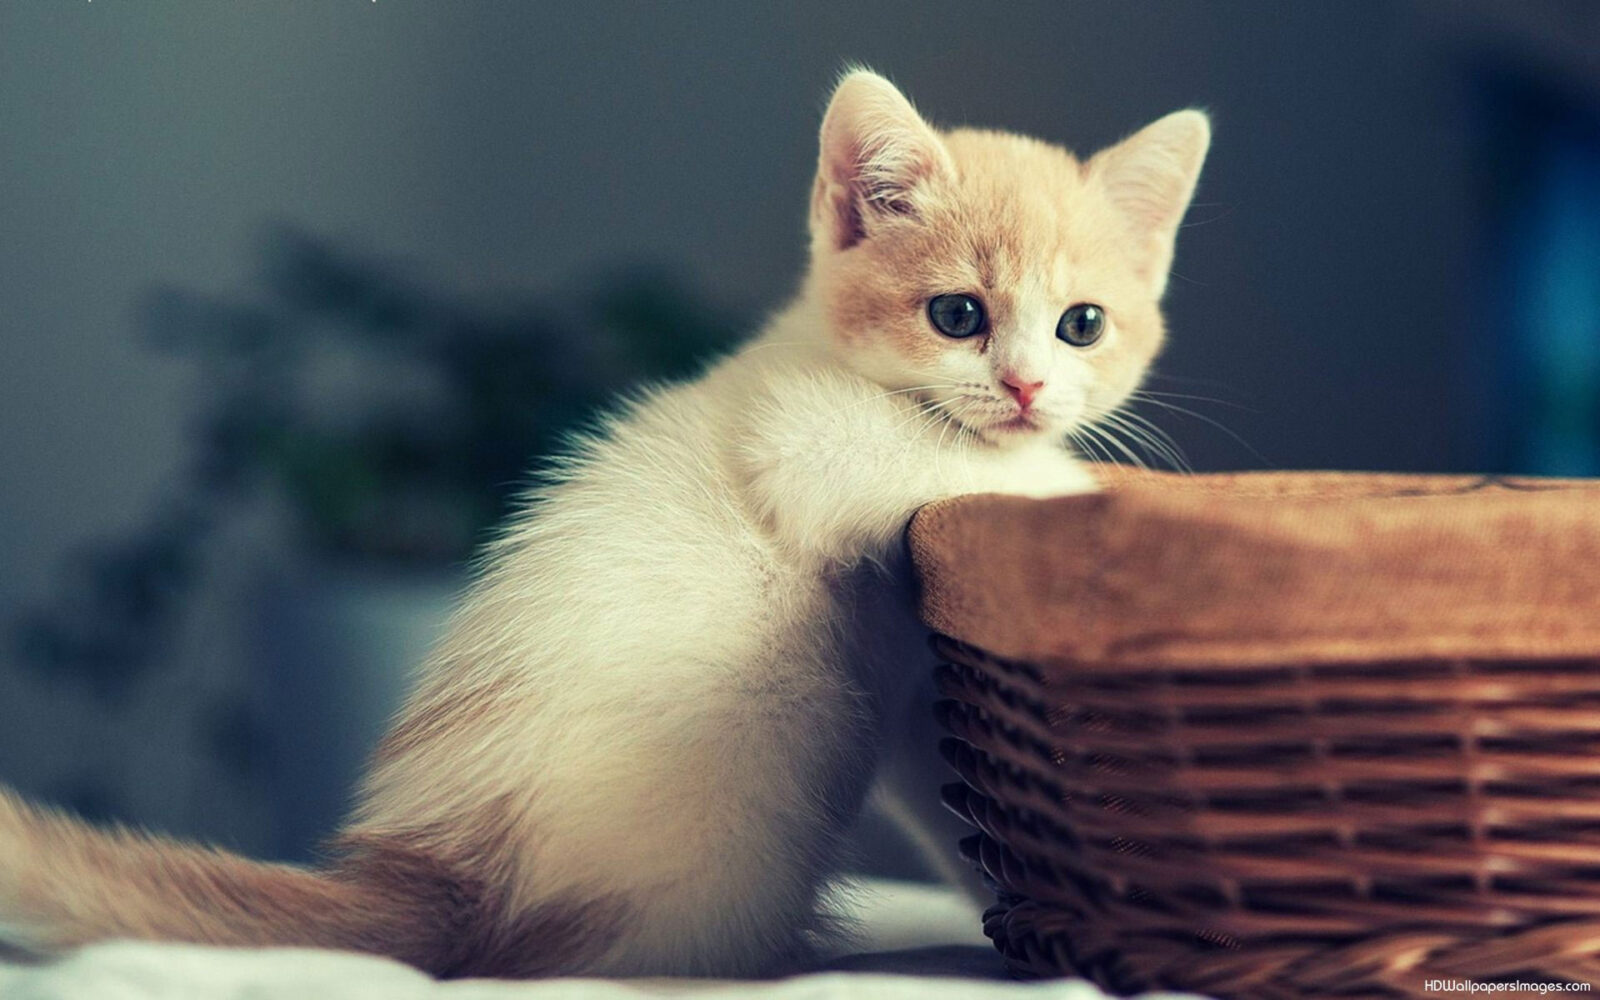 Can You Pass This General Knowledge Quiz While Being Distracted by Adorable Kittens? Cute cat kitten 17